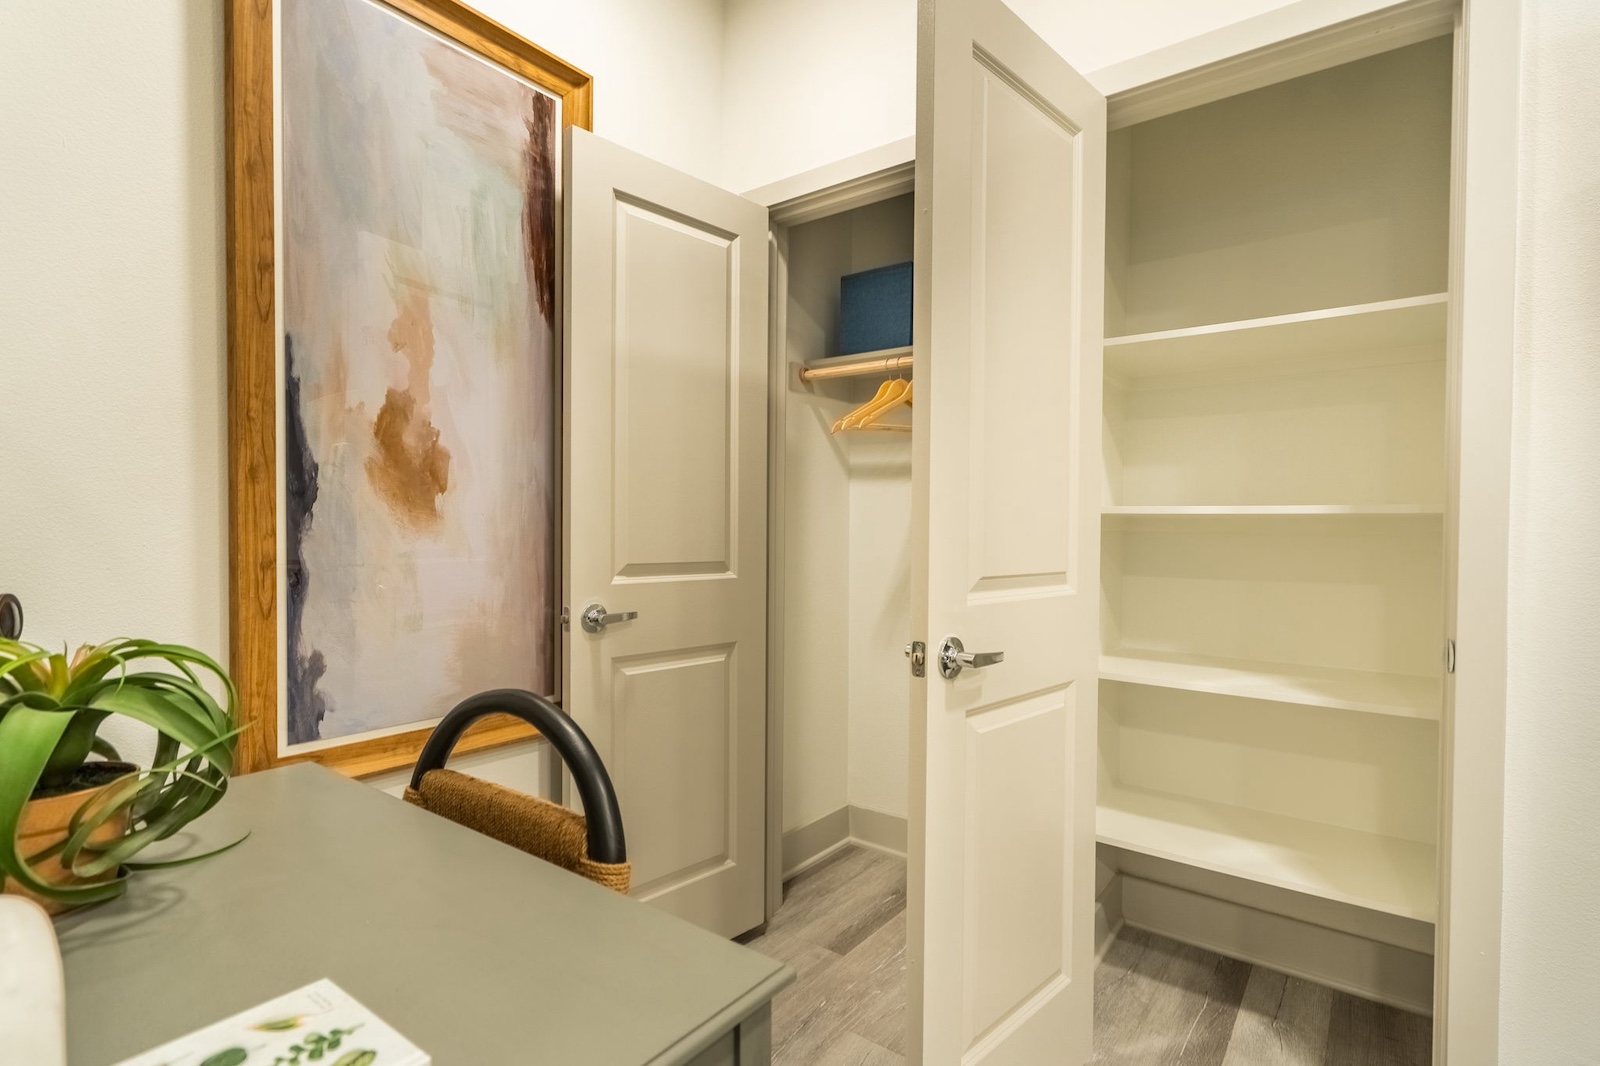 Spacious closets at our apartments for rent in Cypress, Texas. Residences